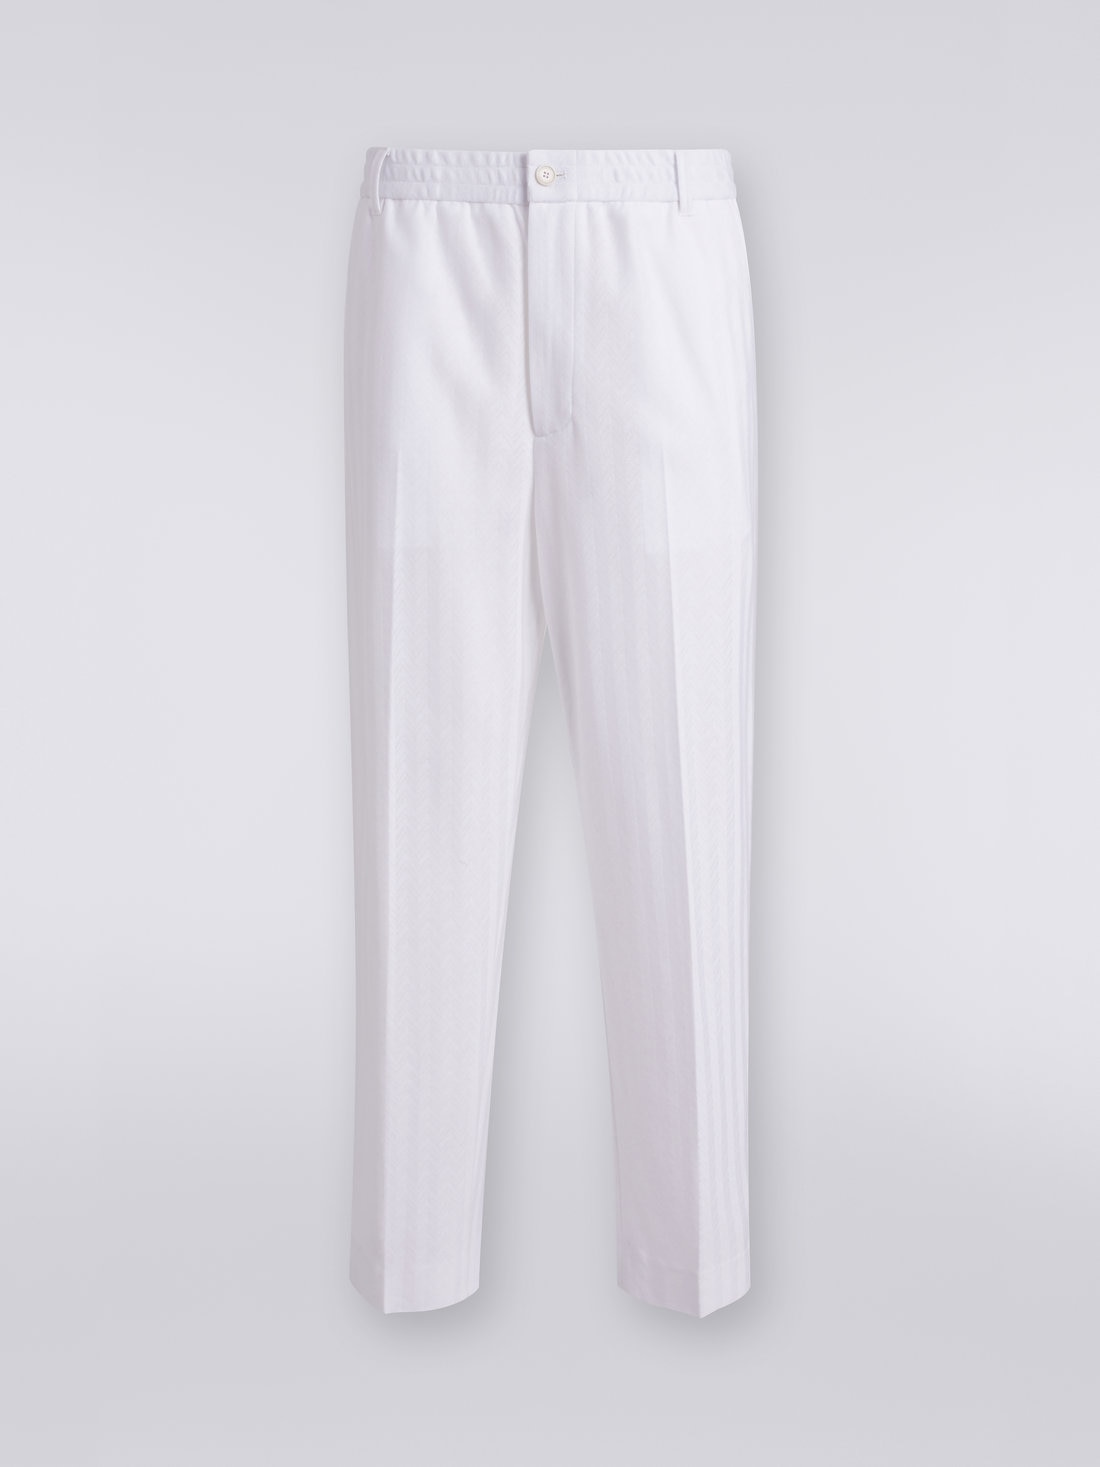 Viscose and cotton chevron trousers with ironed crease, White  - US23SI00BR00L014001 - 0